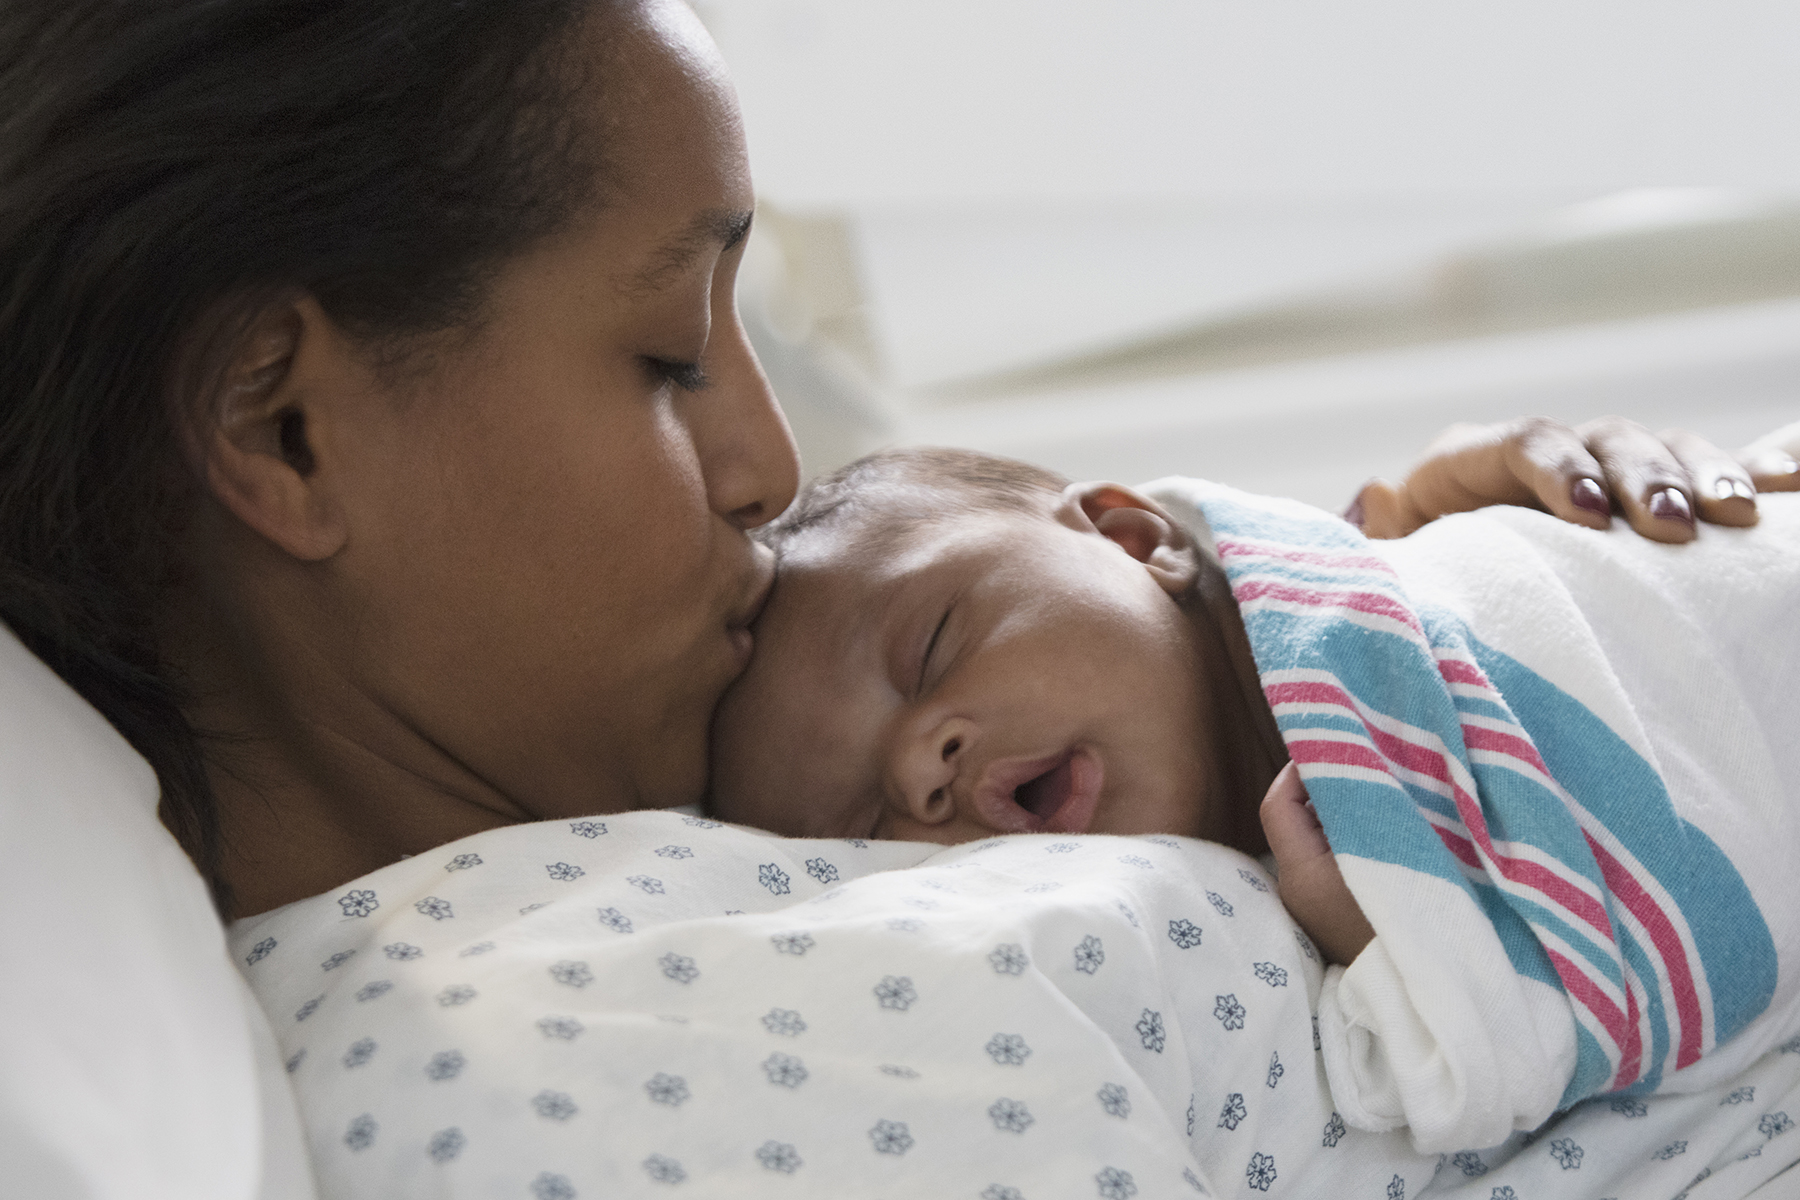 Report recognizes VCU among “Best Hospitals for Maternity”